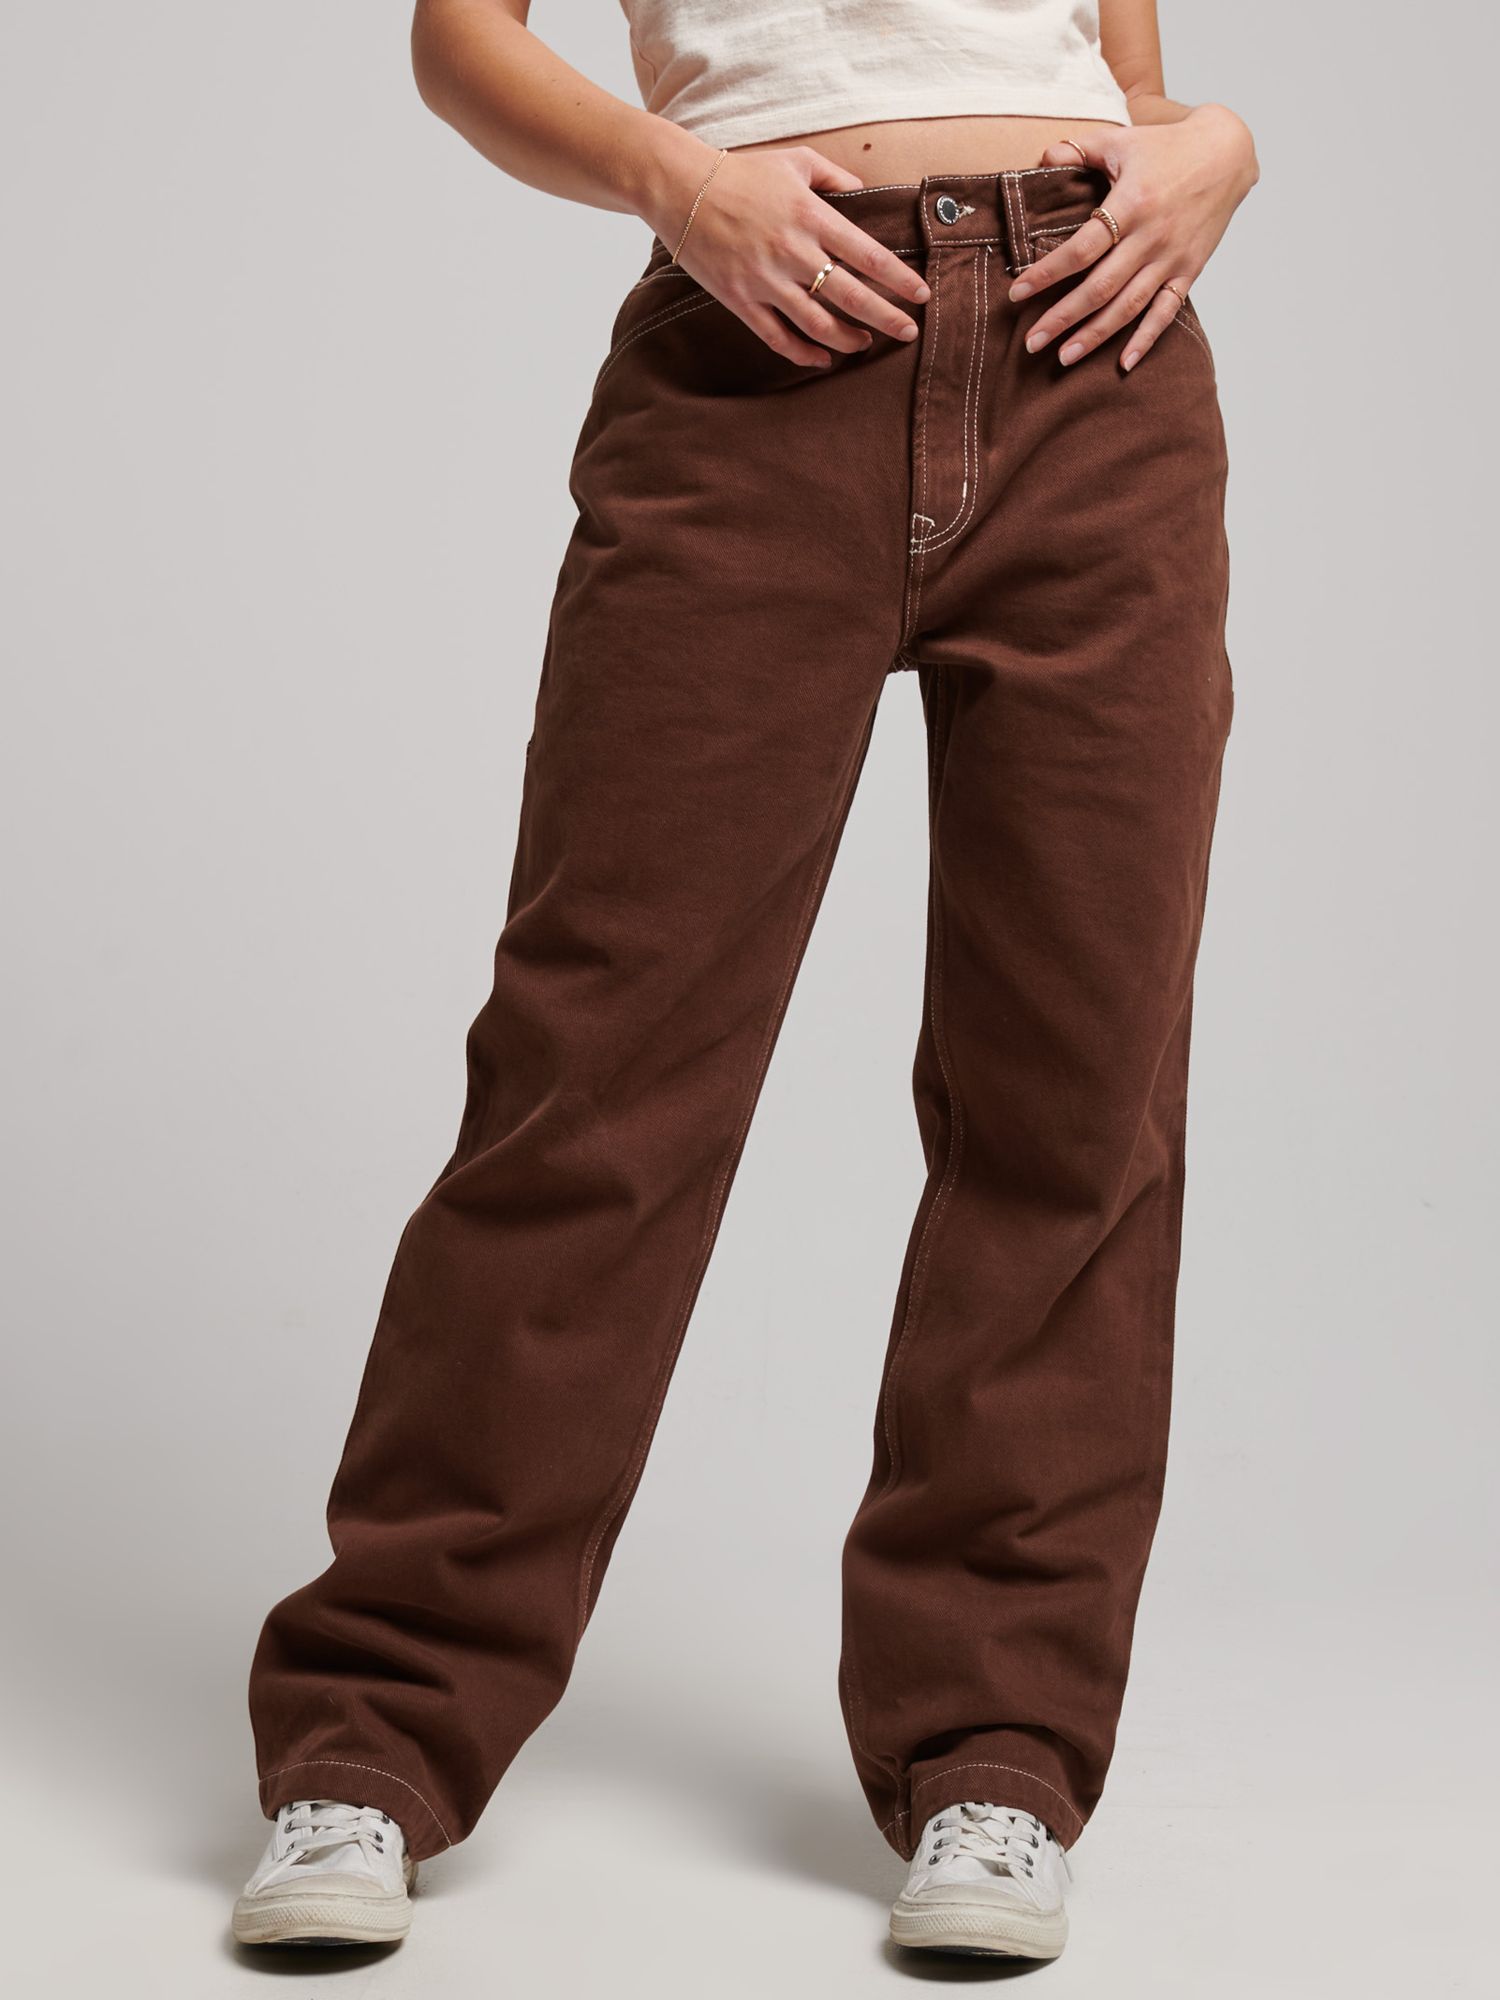 Superdry Contrast Carpenter Trousers, Pinecone Brown at John Lewis ...